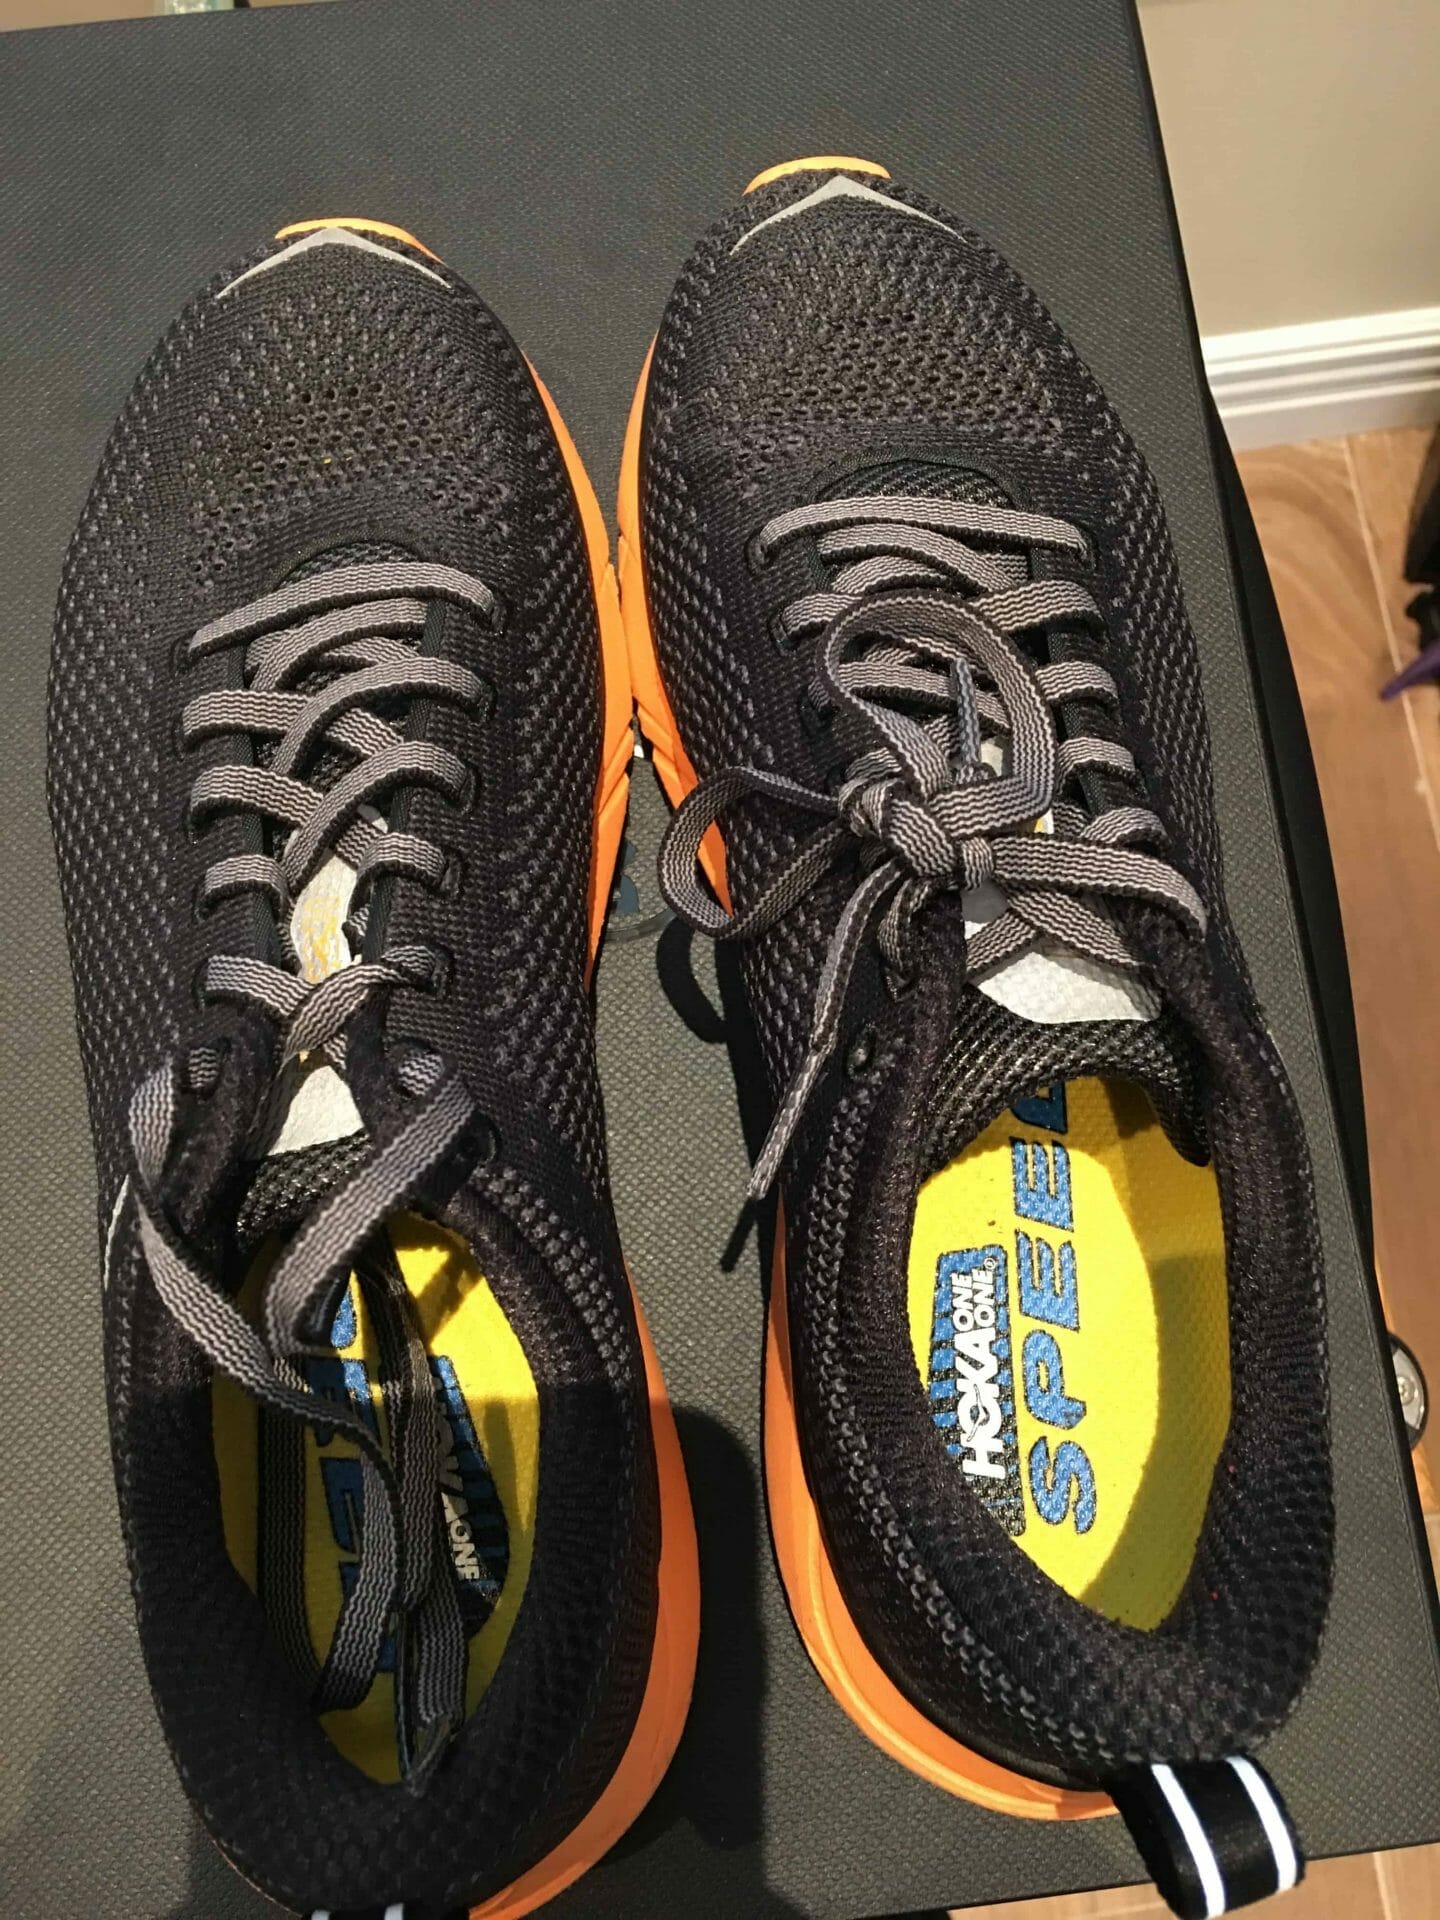 Sneaker Review: Hupana the Everyday Running Shoe - A Triathlete's Diary